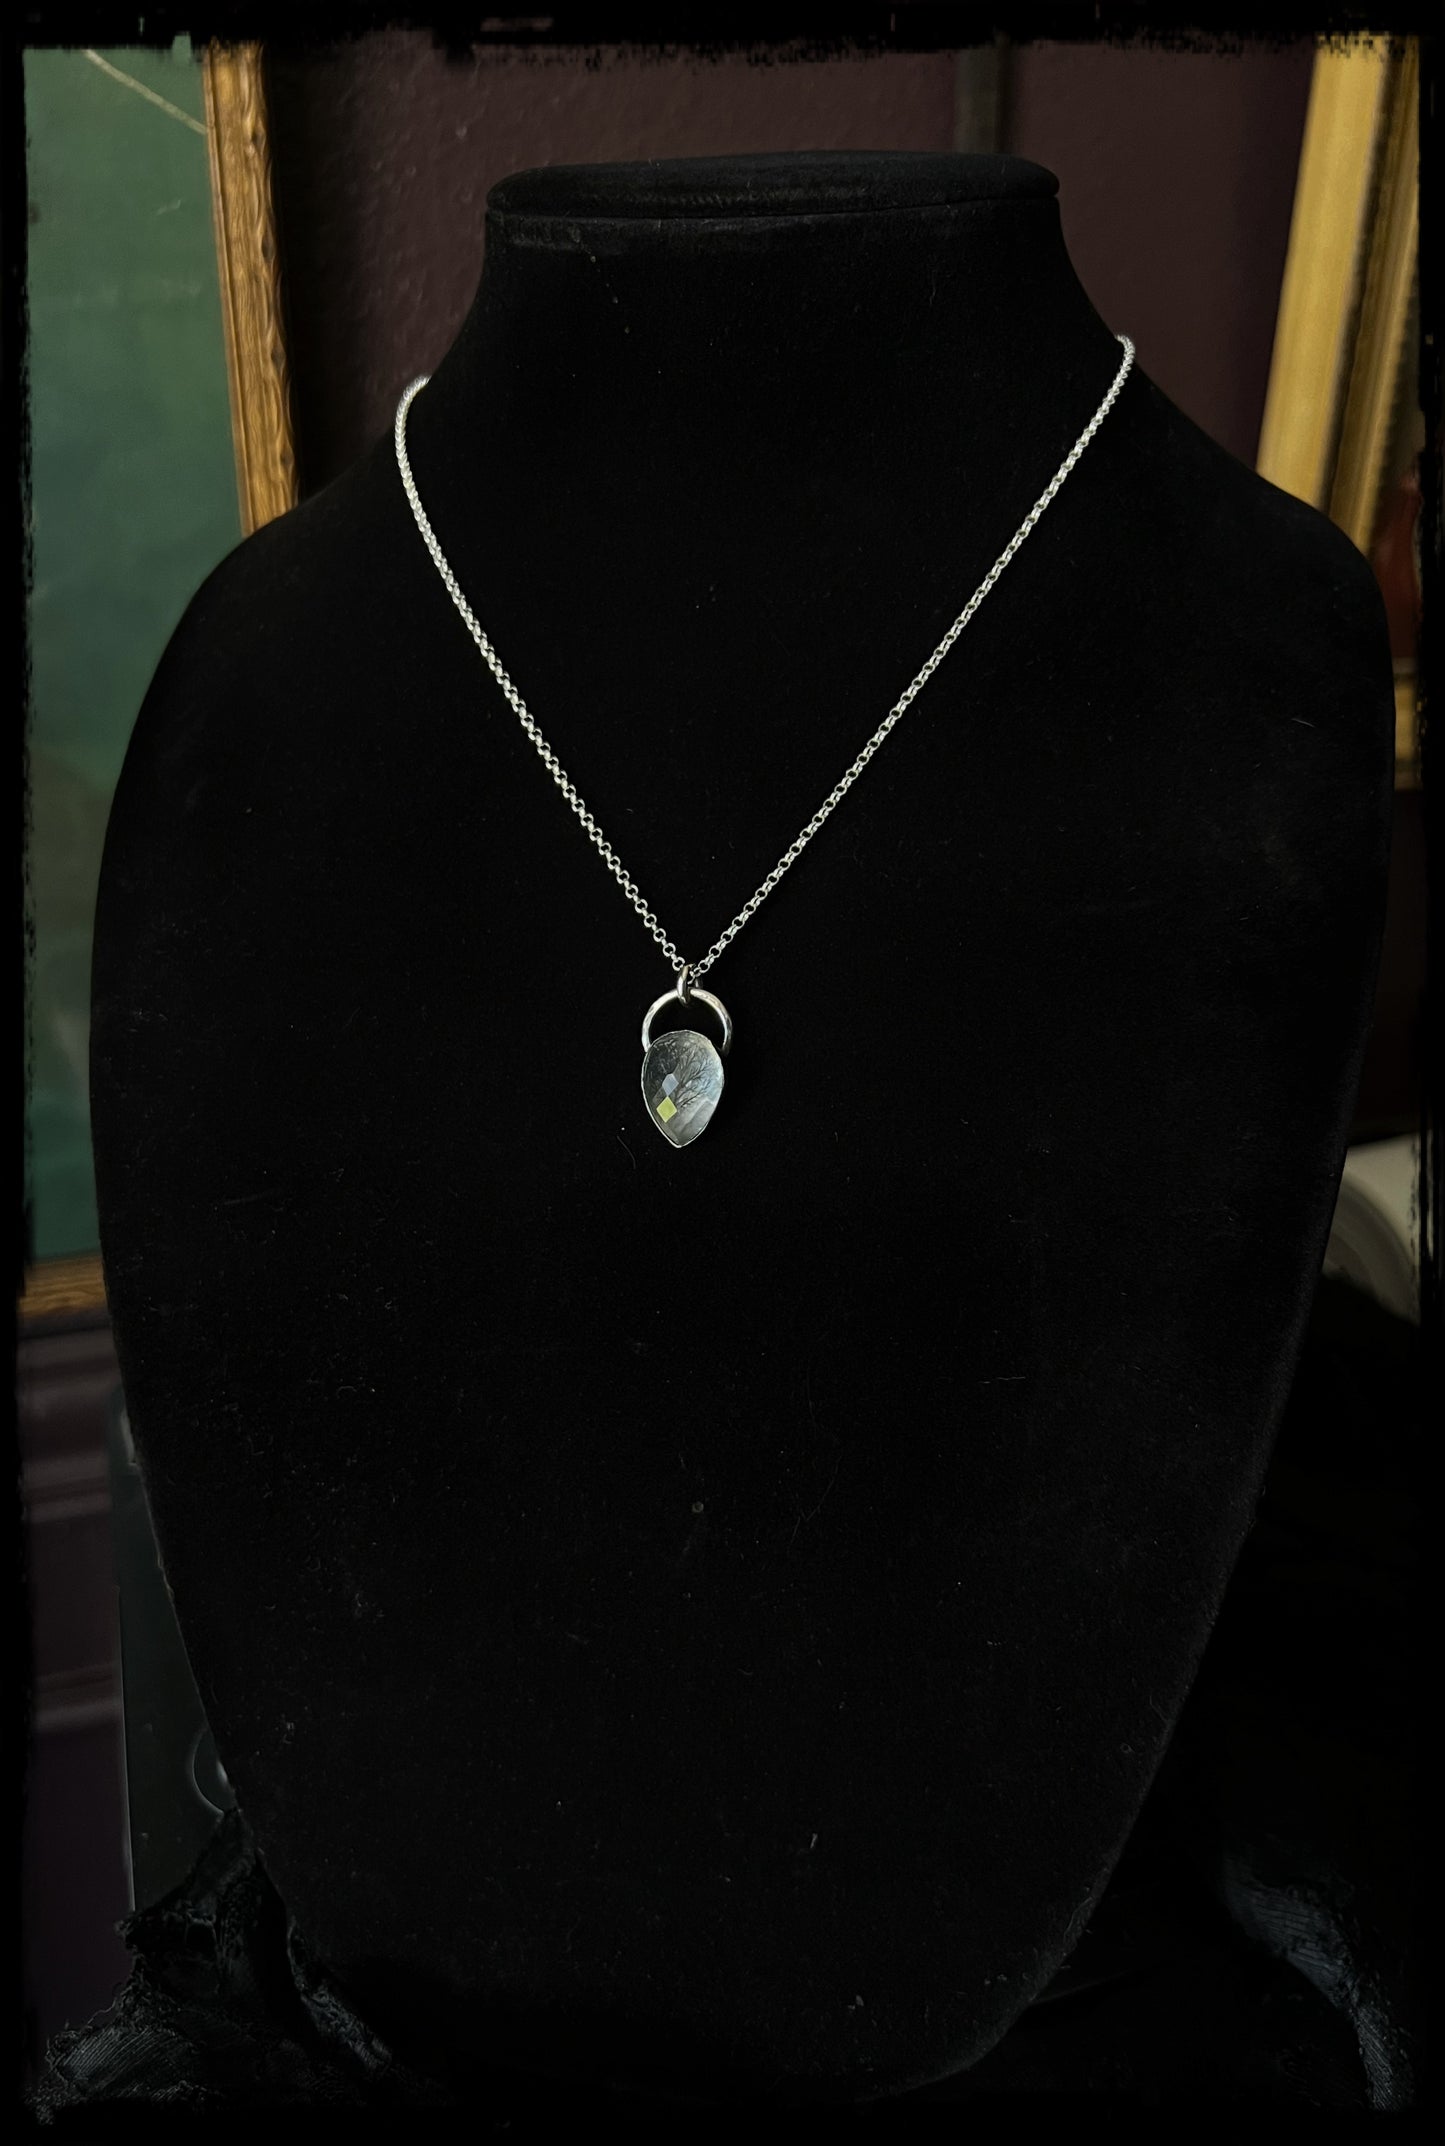 Handcrafted sterling and fine silver rose cut Himalayan quartz doublet with encased winter tree etching pendant necklace ~